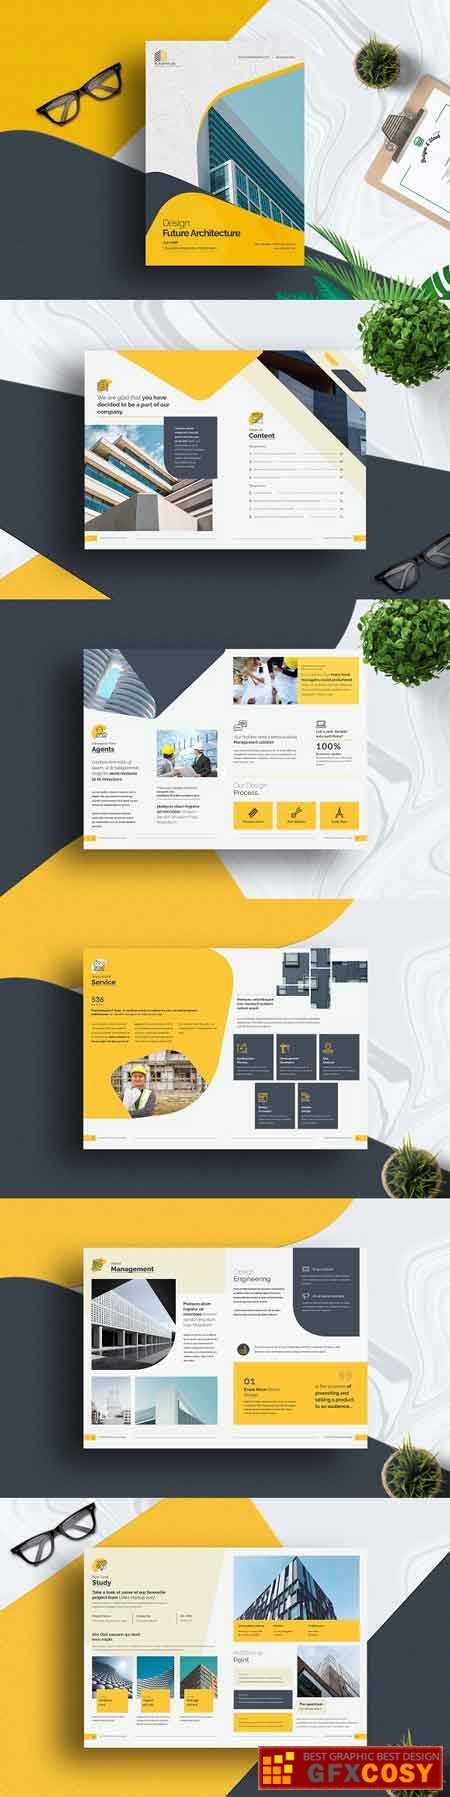 Brochure Indesign Template 2967040 » Free Download Photoshop Within Indesign Templates Free Download Brochure